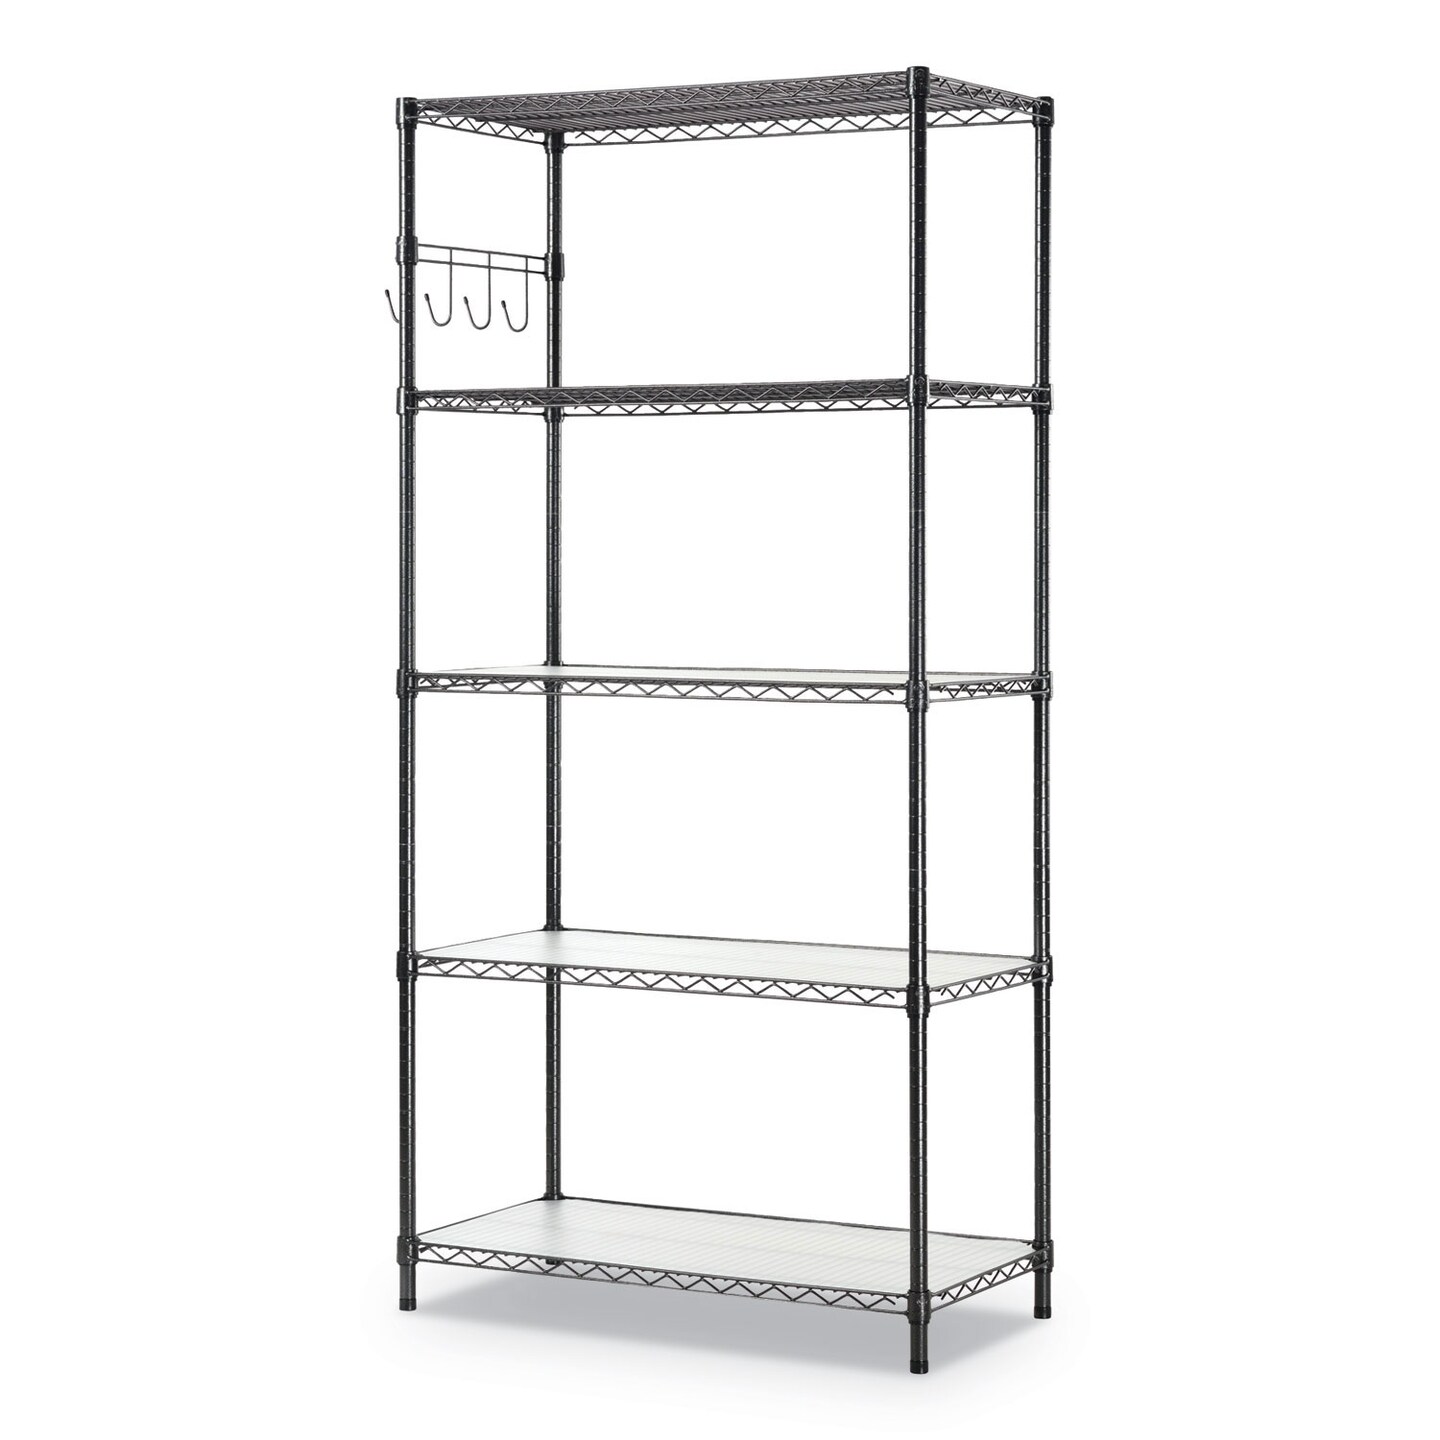 Alera 5-Shelf Wire Shelving Kit with Casters and Shelf Liners, 36w